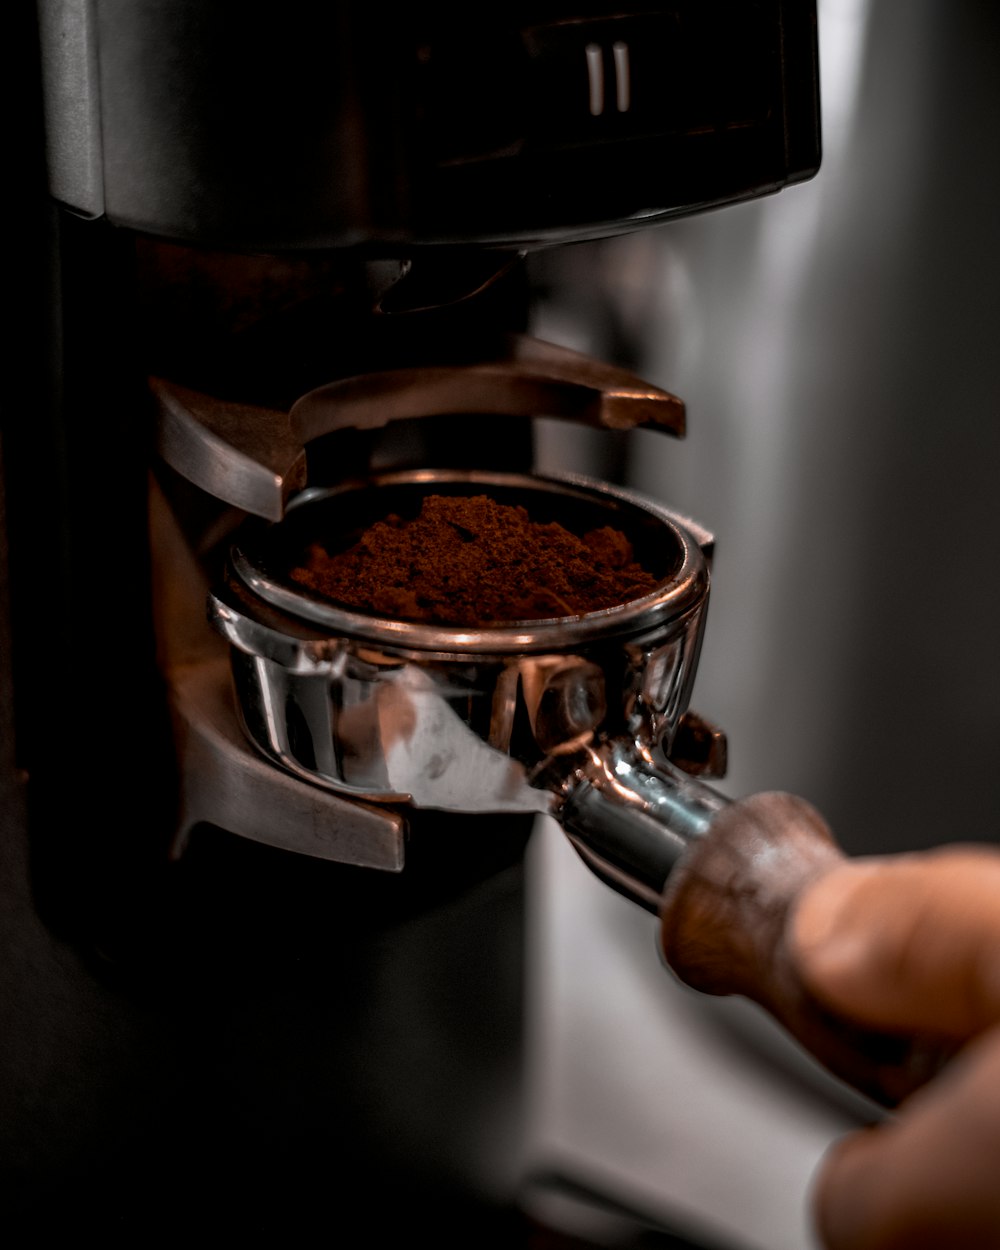 a person using a coffee grinder to make a cup of coffee